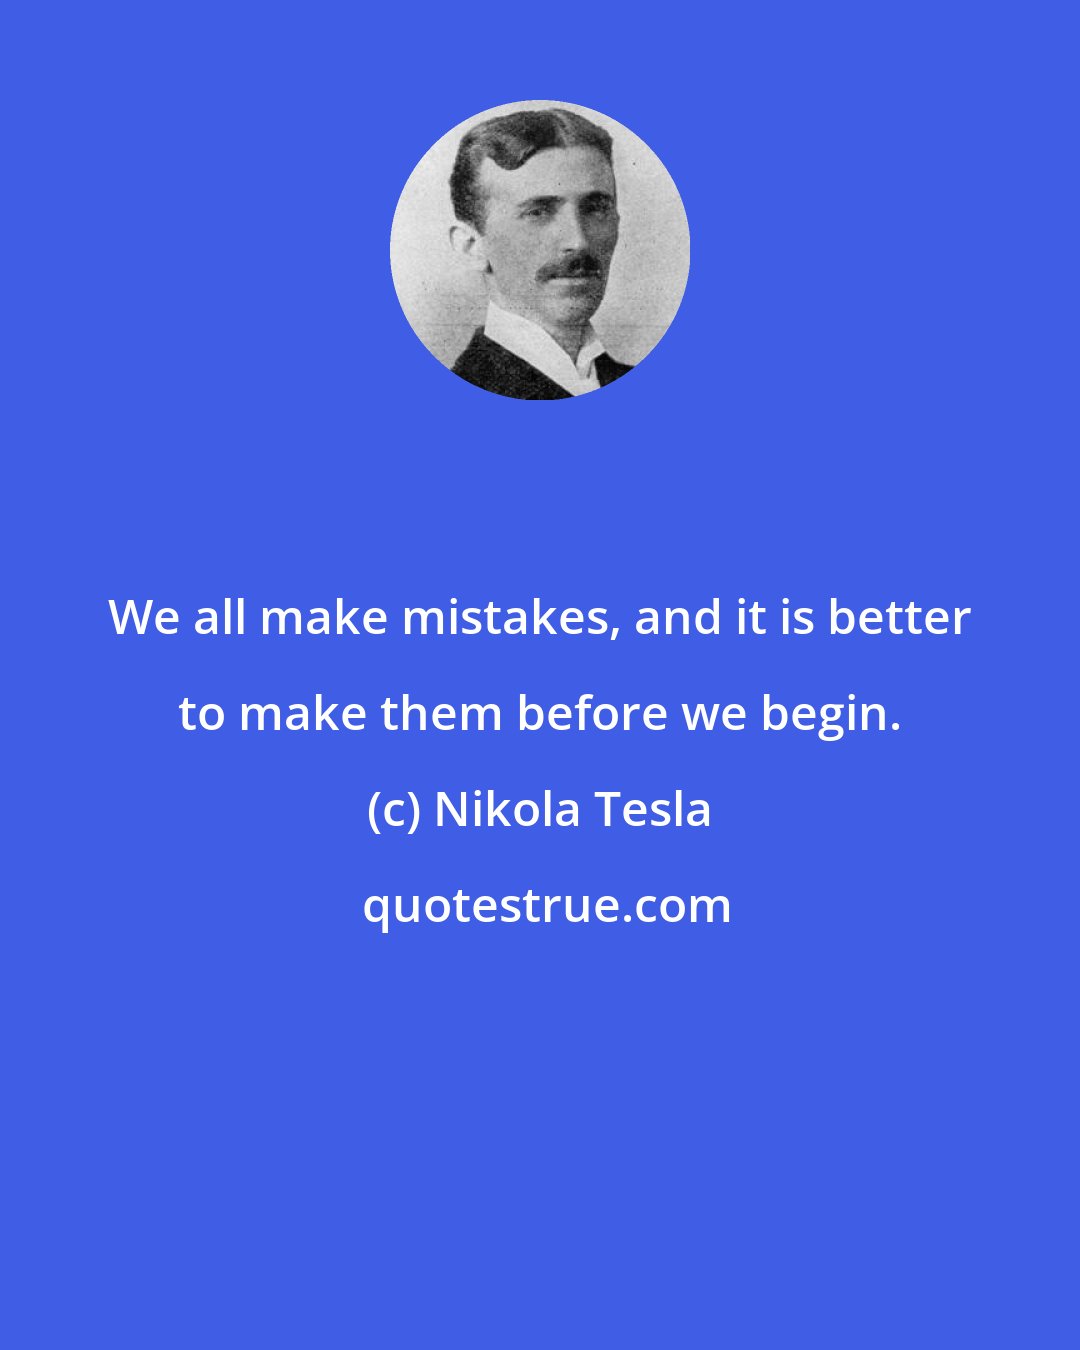 Nikola Tesla: We all make mistakes, and it is better to make them before we begin.